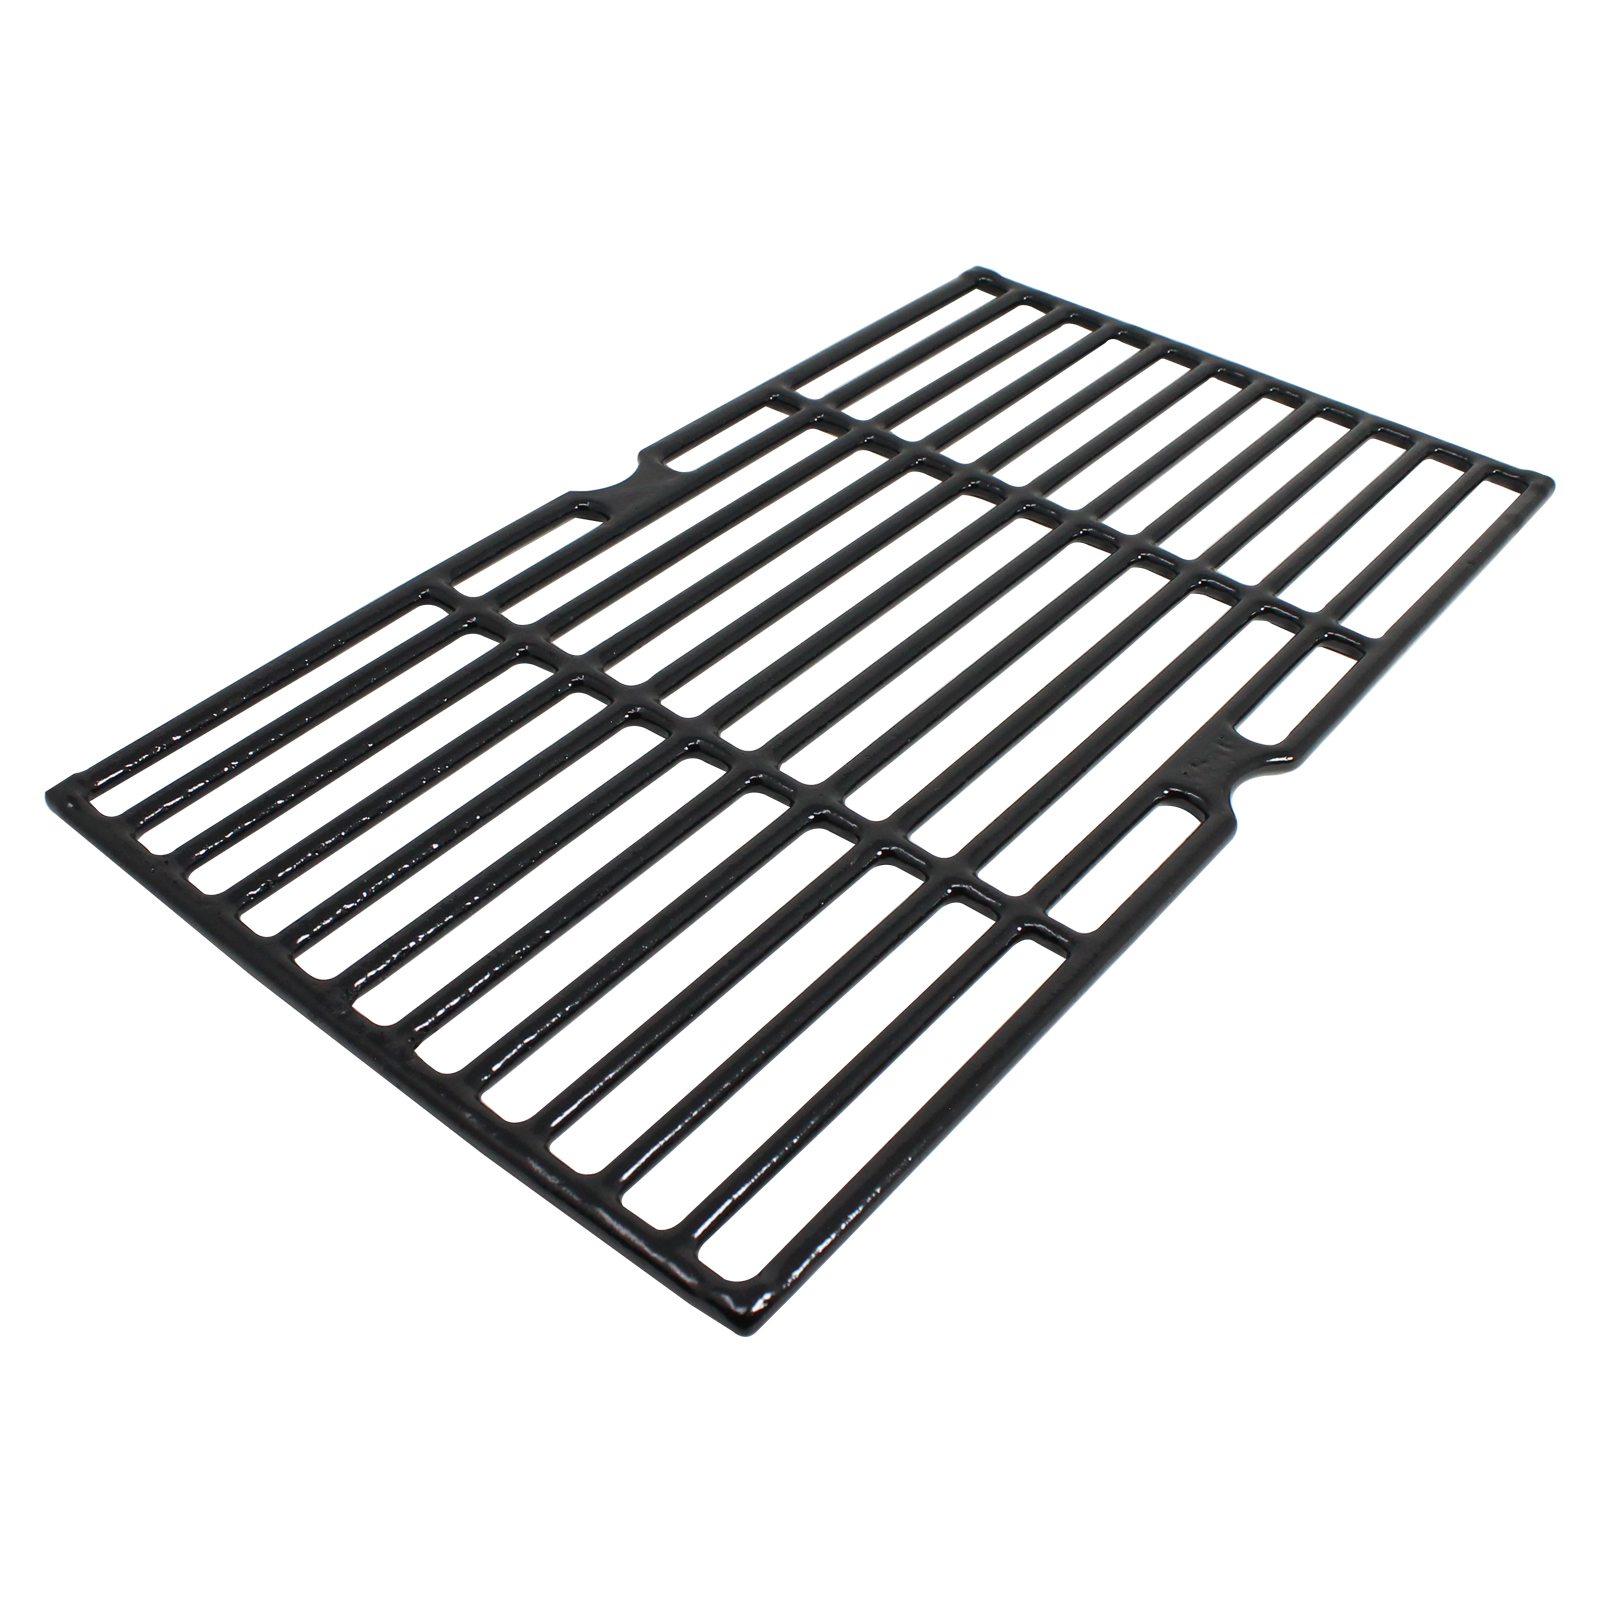 2 Pack BBQ Grill Cooking Grates Replacement for Broil King Sovereign 90, Broil King Sovereign 20, Broil King Sovereign 70, Charbroil 463251605, Charbroil 463251713, 463240904 - Cast Iron Grid 16 3/4" - image 2 of 4